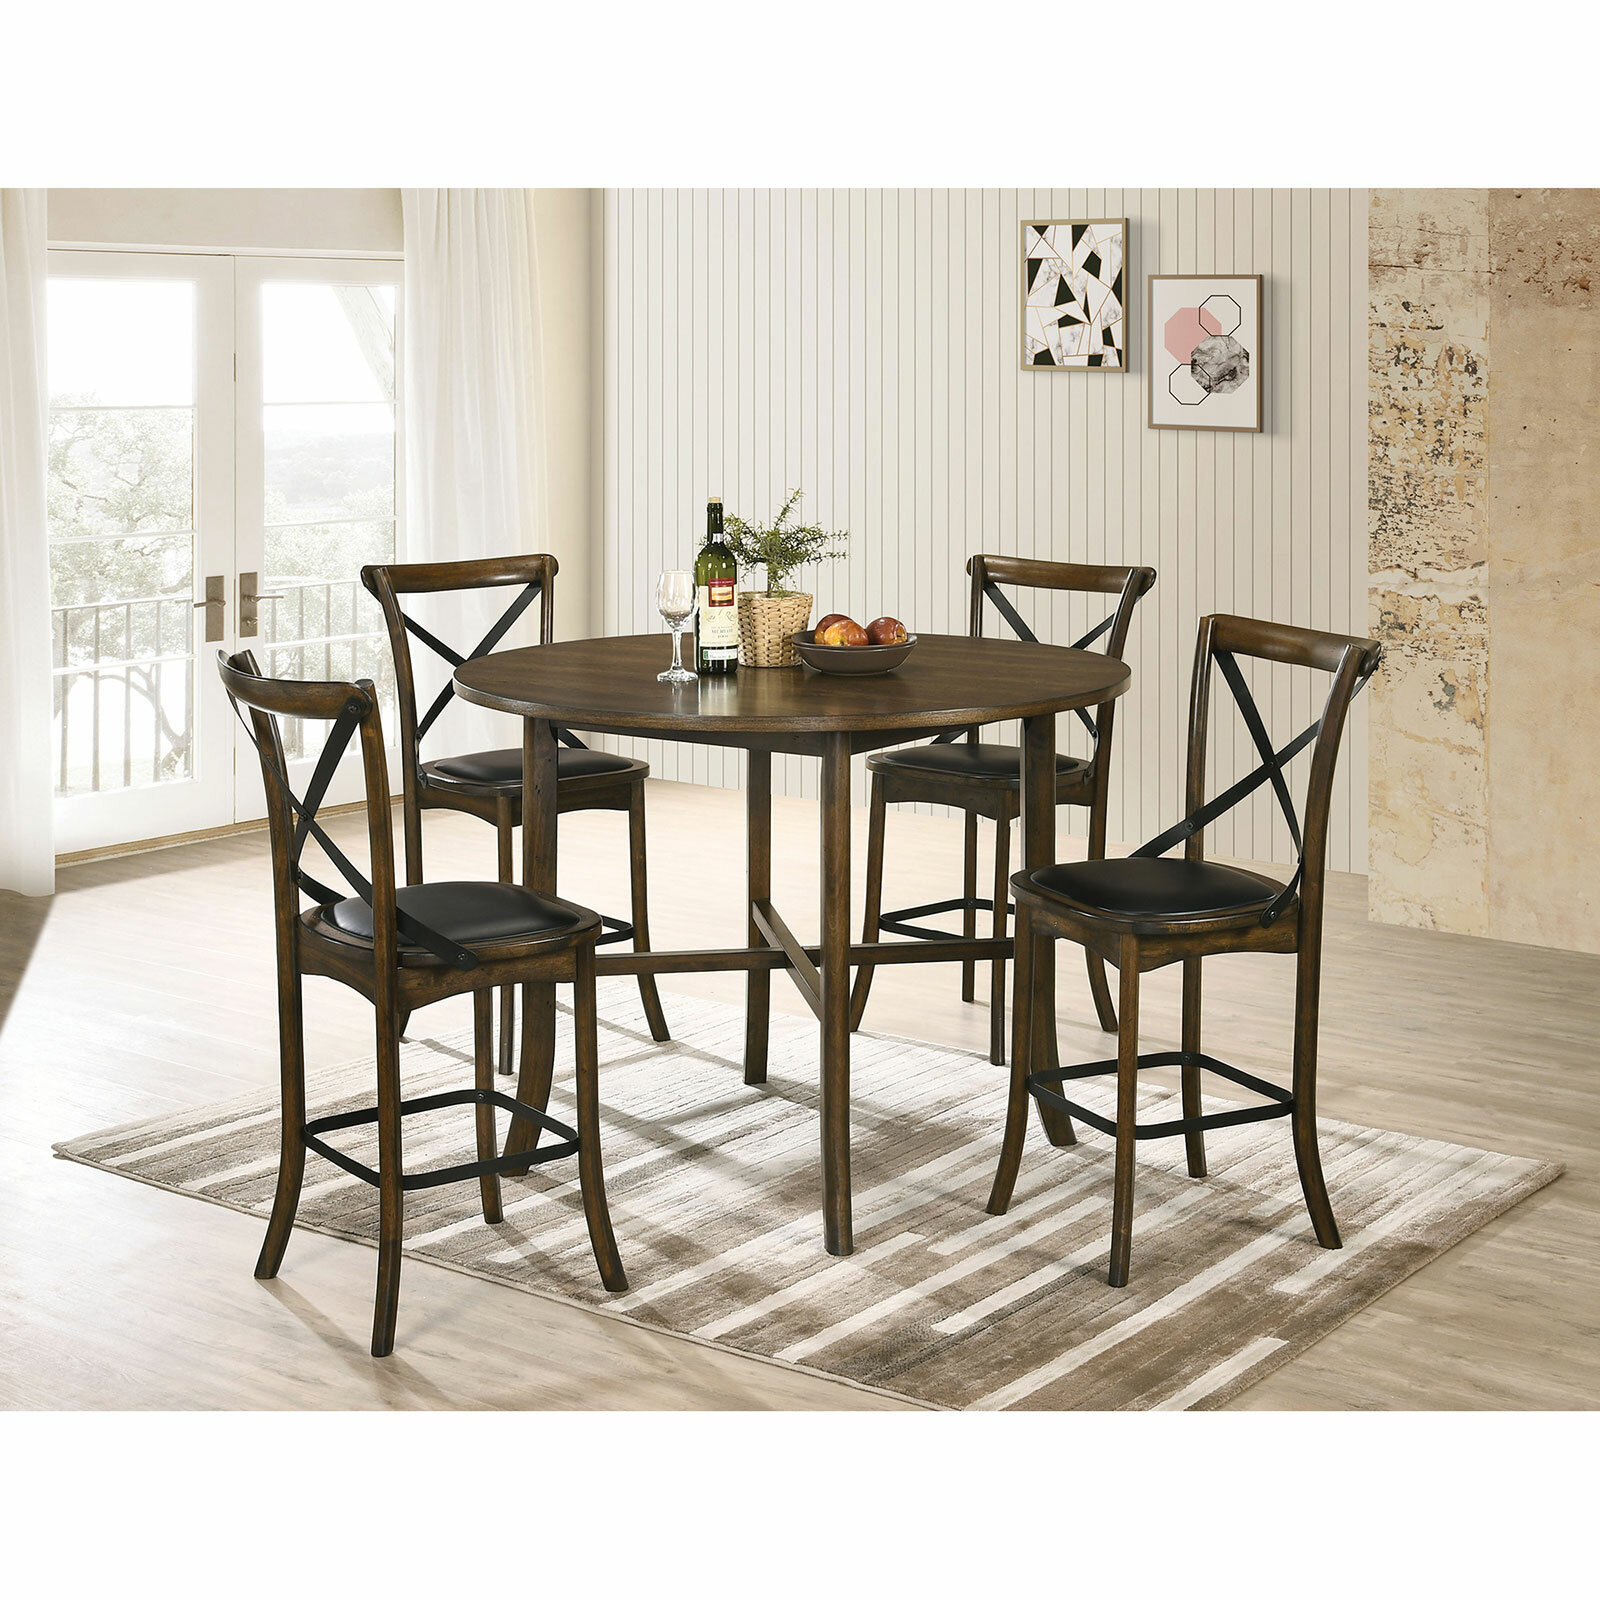 Gracie Oaks Torrence Placer 5 Piece Counter Height Dining Set 